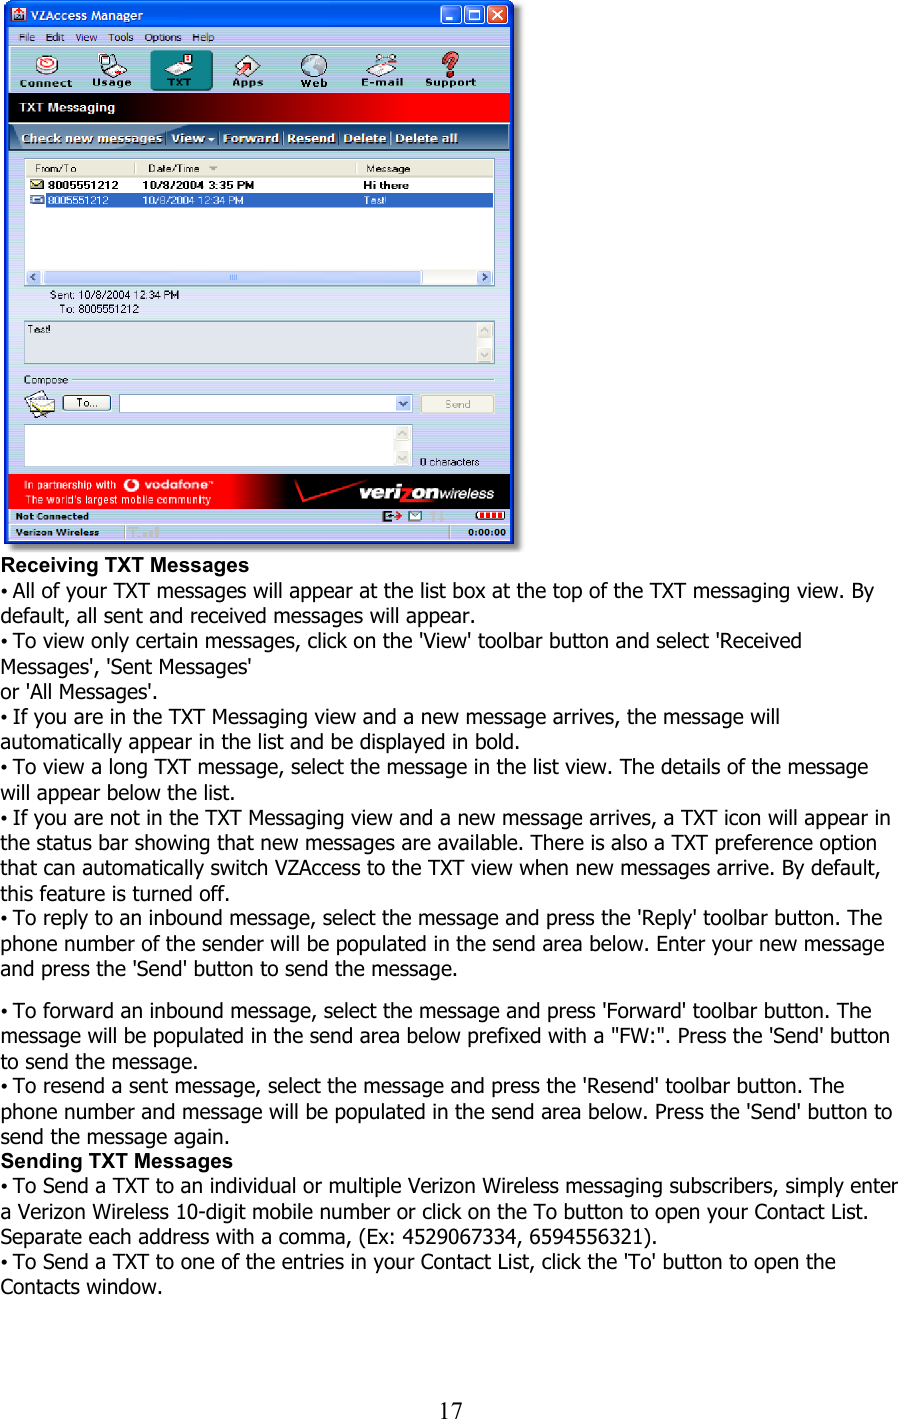  17   Receiving TXT Messages • All of your TXT messages will appear at the list box at the top of the TXT messaging view. By default, all sent and received messages will appear. • To view only certain messages, click on the &apos;View&apos; toolbar button and select &apos;Received Messages&apos;, &apos;Sent Messages&apos; or &apos;All Messages&apos;. • If you are in the TXT Messaging view and a new message arrives, the message will automatically appear in the list and be displayed in bold. • To view a long TXT message, select the message in the list view. The details of the message will appear below the list. • If you are not in the TXT Messaging view and a new message arrives, a TXT icon will appear in the status bar showing that new messages are available. There is also a TXT preference option that can automatically switch VZAccess to the TXT view when new messages arrive. By default, this feature is turned off. • To reply to an inbound message, select the message and press the &apos;Reply&apos; toolbar button. The phone number of the sender will be populated in the send area below. Enter your new message and press the &apos;Send&apos; button to send the message.   • To forward an inbound message, select the message and press &apos;Forward&apos; toolbar button. The message will be populated in the send area below prefixed with a &quot;FW:&quot;. Press the &apos;Send&apos; button to send the message. • To resend a sent message, select the message and press the &apos;Resend&apos; toolbar button. The phone number and message will be populated in the send area below. Press the &apos;Send&apos; button to send the message again. Sending TXT Messages • To Send a TXT to an individual or multiple Verizon Wireless messaging subscribers, simply enter a Verizon Wireless 10-digit mobile number or click on the To button to open your Contact List. Separate each address with a comma, (Ex: 4529067334, 6594556321). • To Send a TXT to one of the entries in your Contact List, click the &apos;To&apos; button to open the Contacts window.  